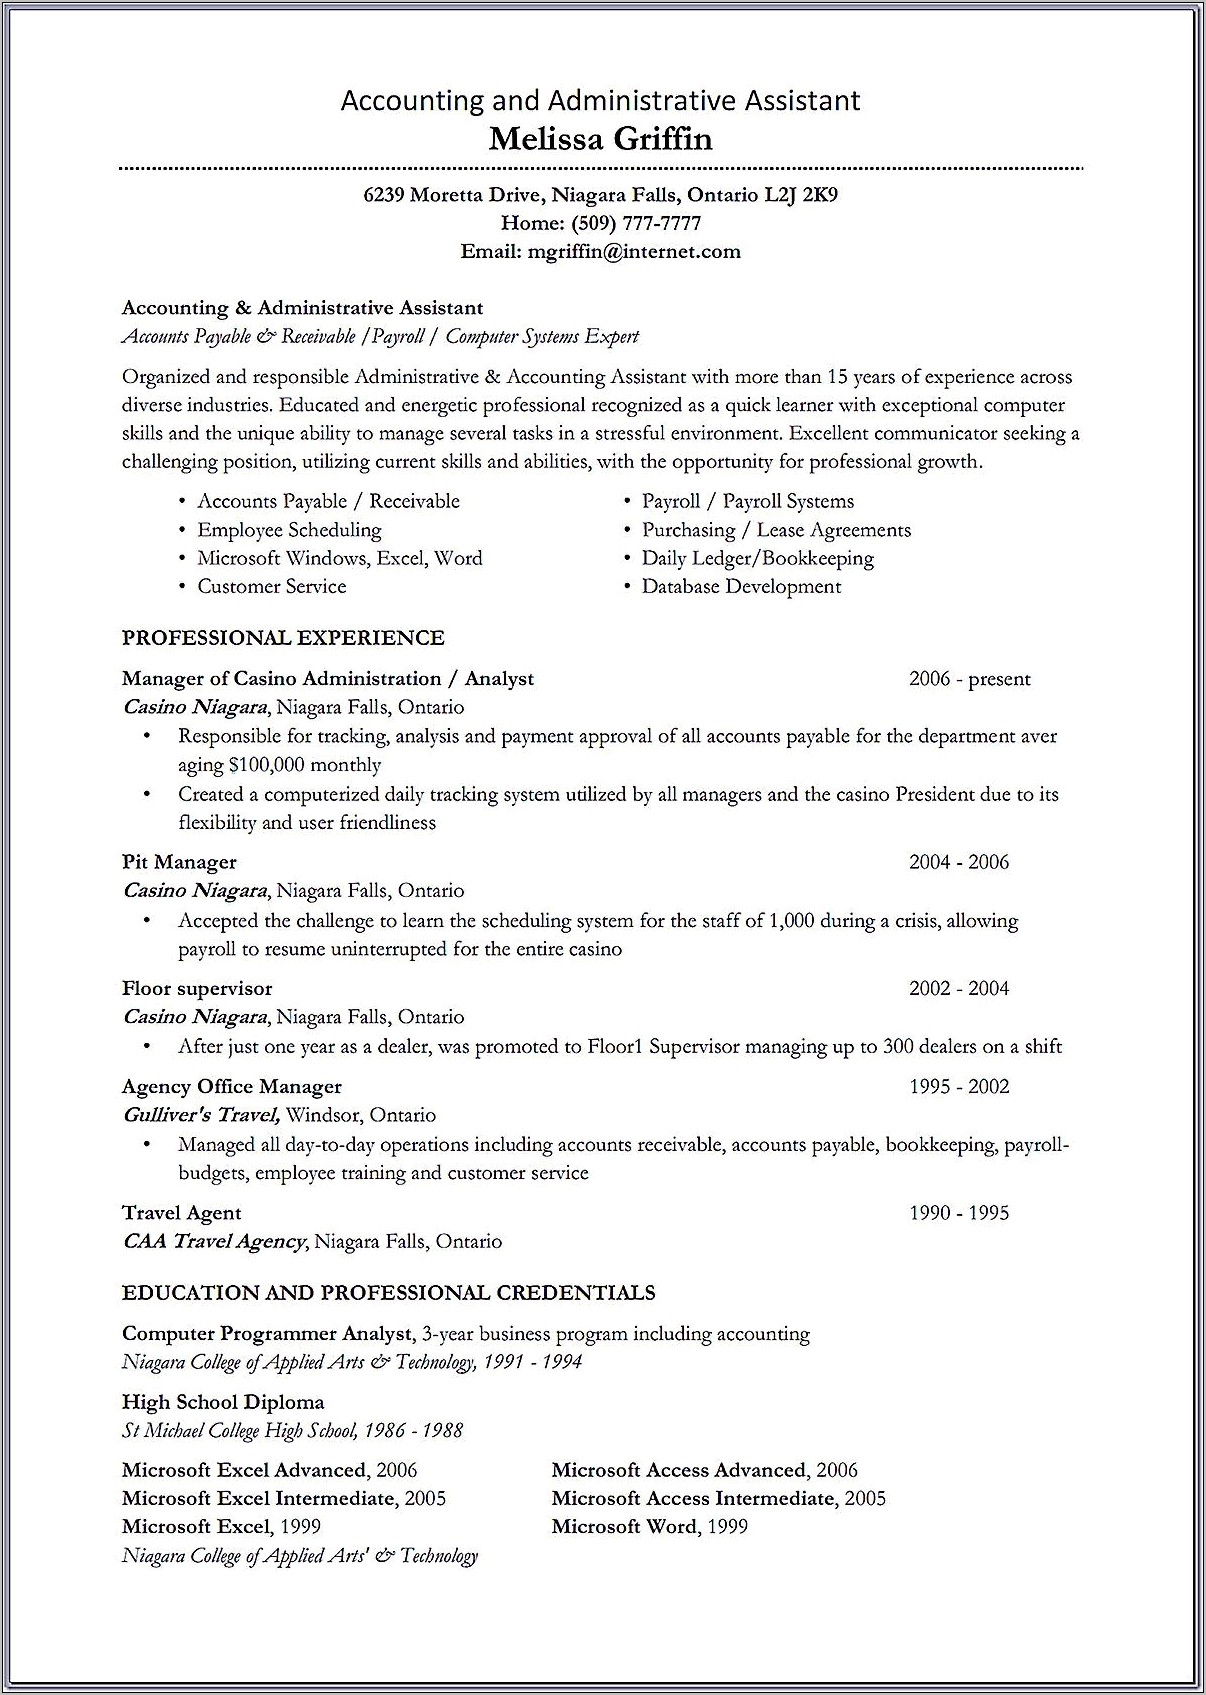 Executive Assistant Applying For Analyst Job Resume